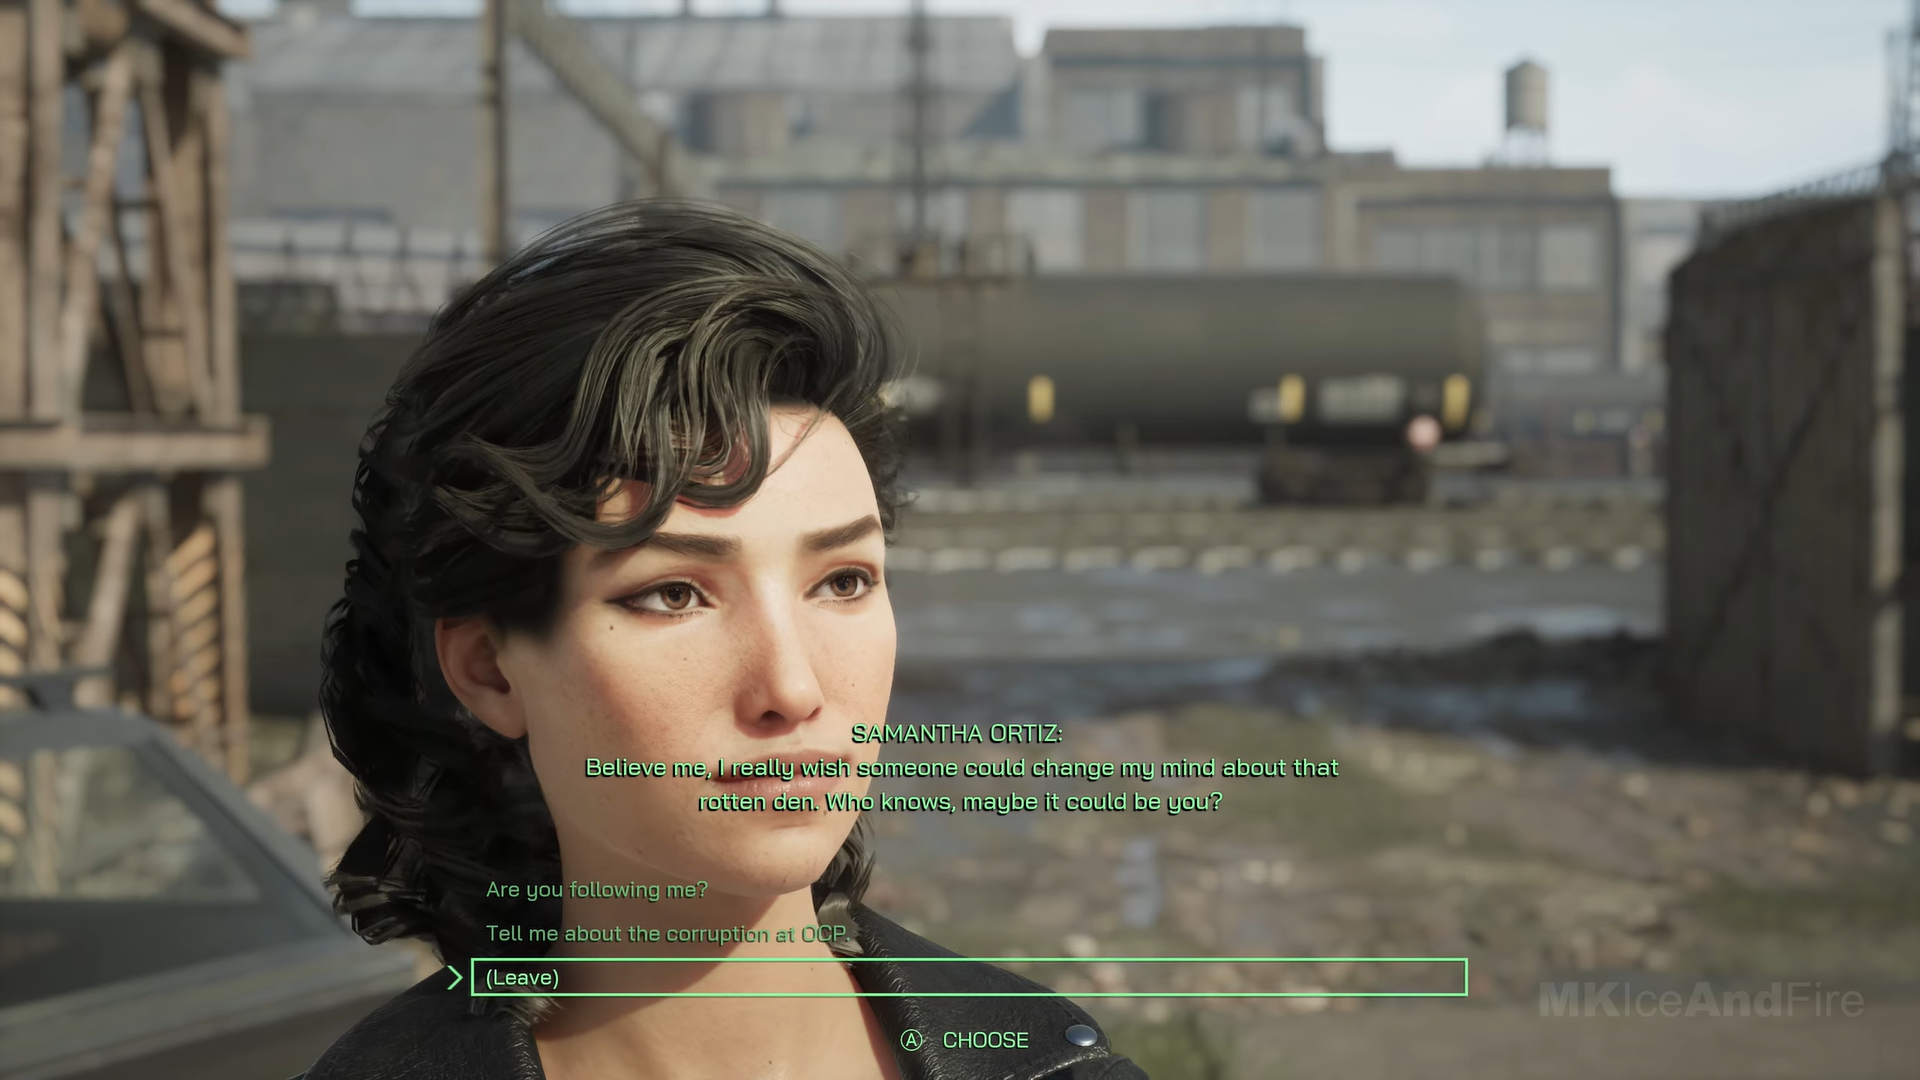 A screenshot showing the dialogue options with Samantha Ortiz. 